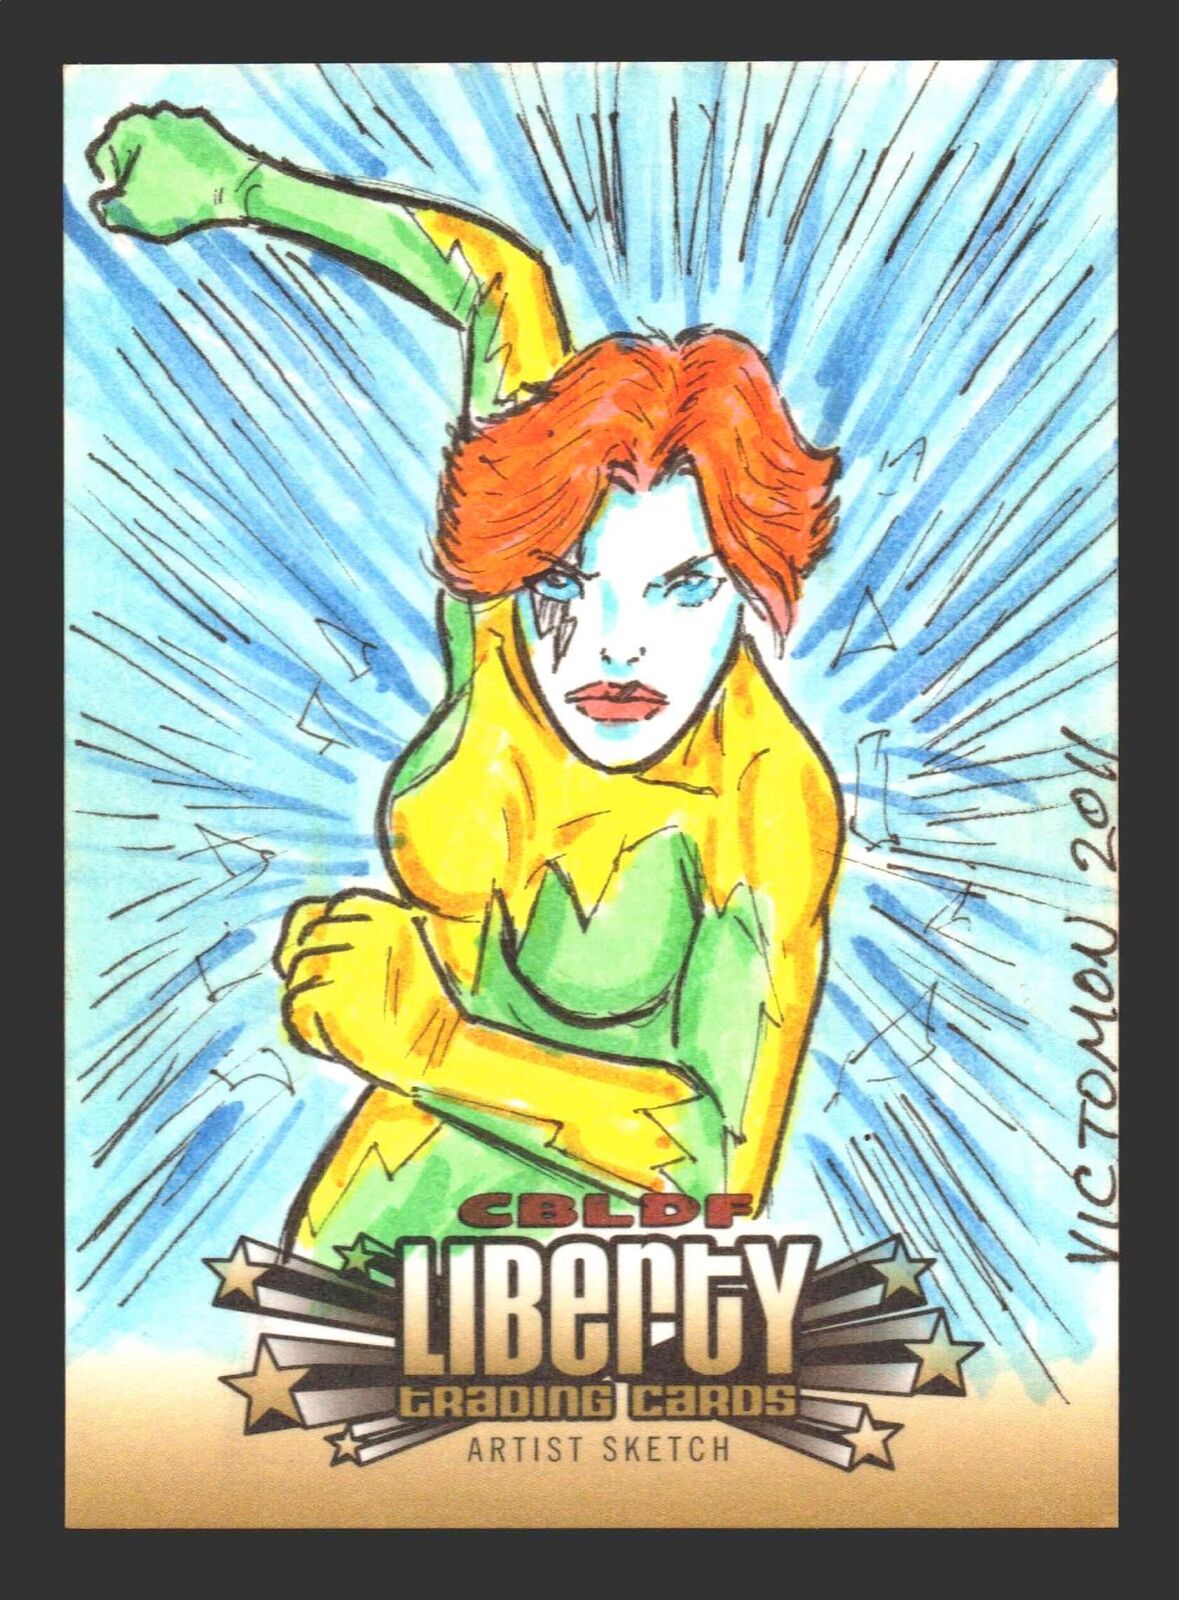 2011 Cryptozoic CBLDF Liberty Artist Sketch Card by Victor \